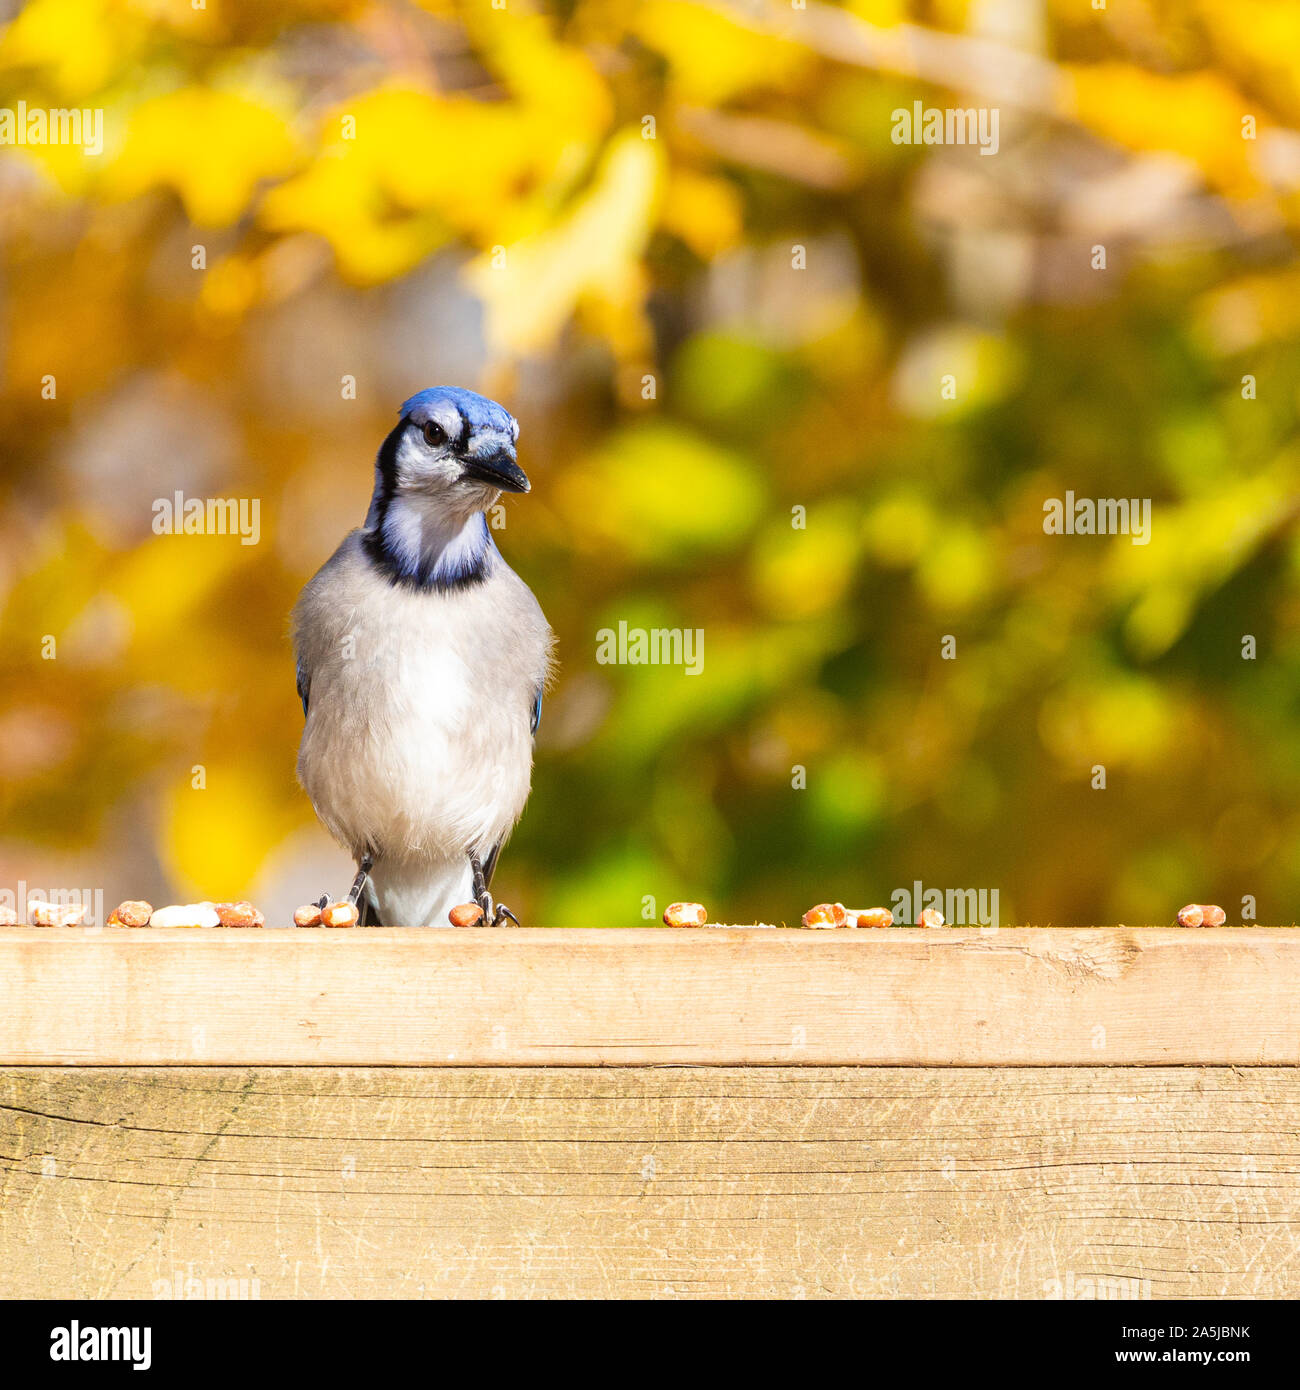 Closeup of one bluejay on a wooden deck railing snacking on shelled peanuts, against a gold and green foliage background. Stock Photo